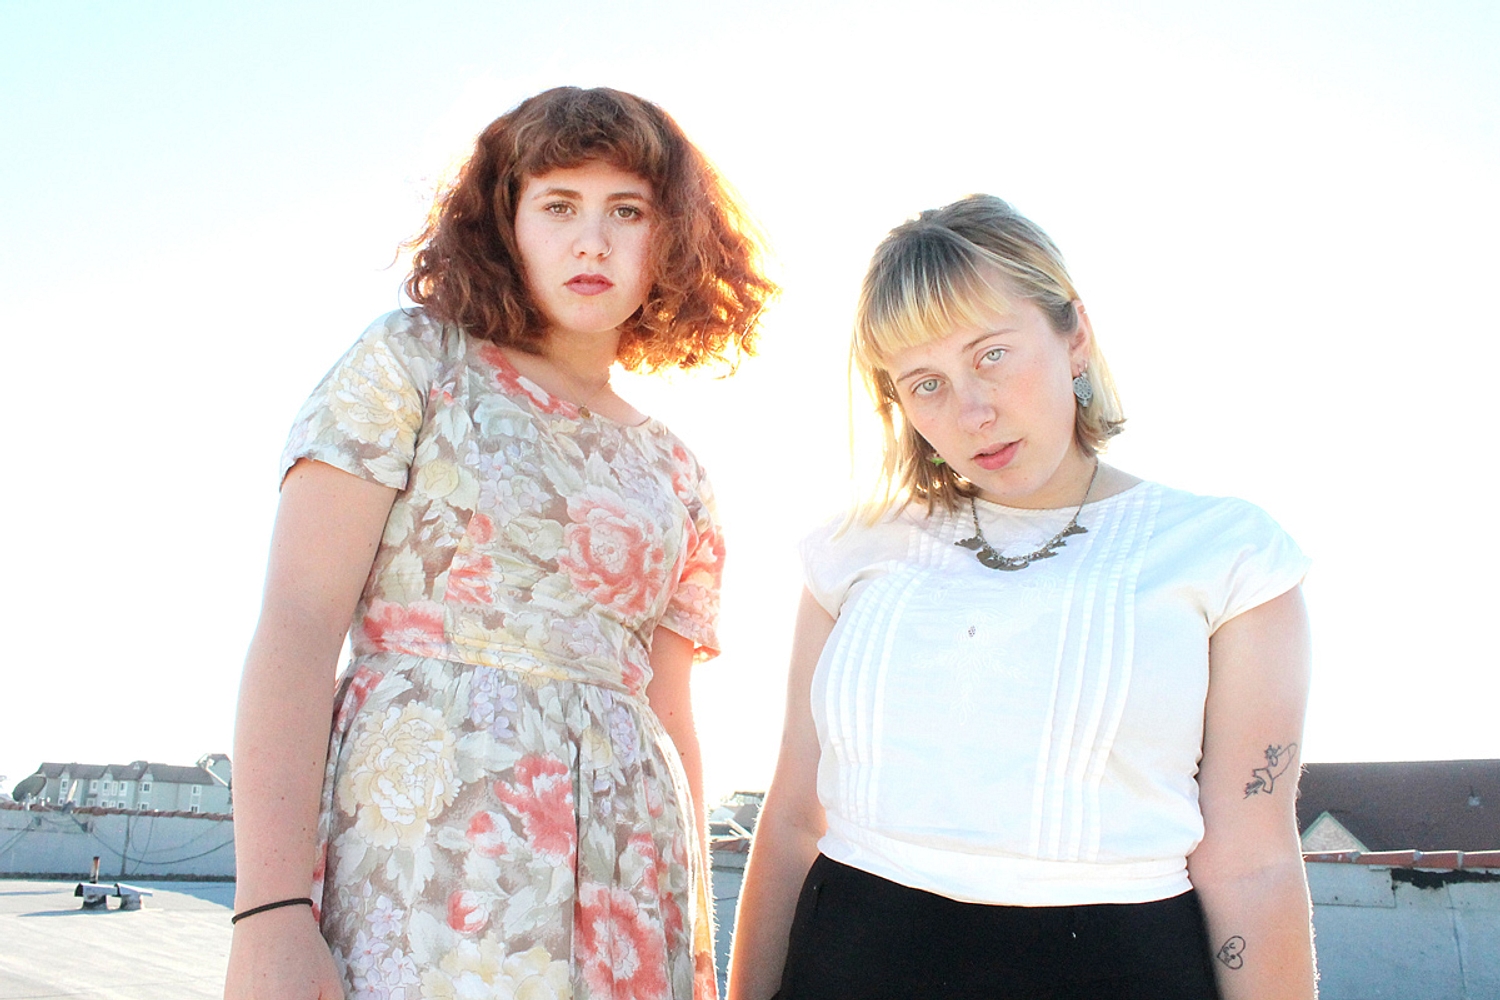 It's a big world out there: Girlpool